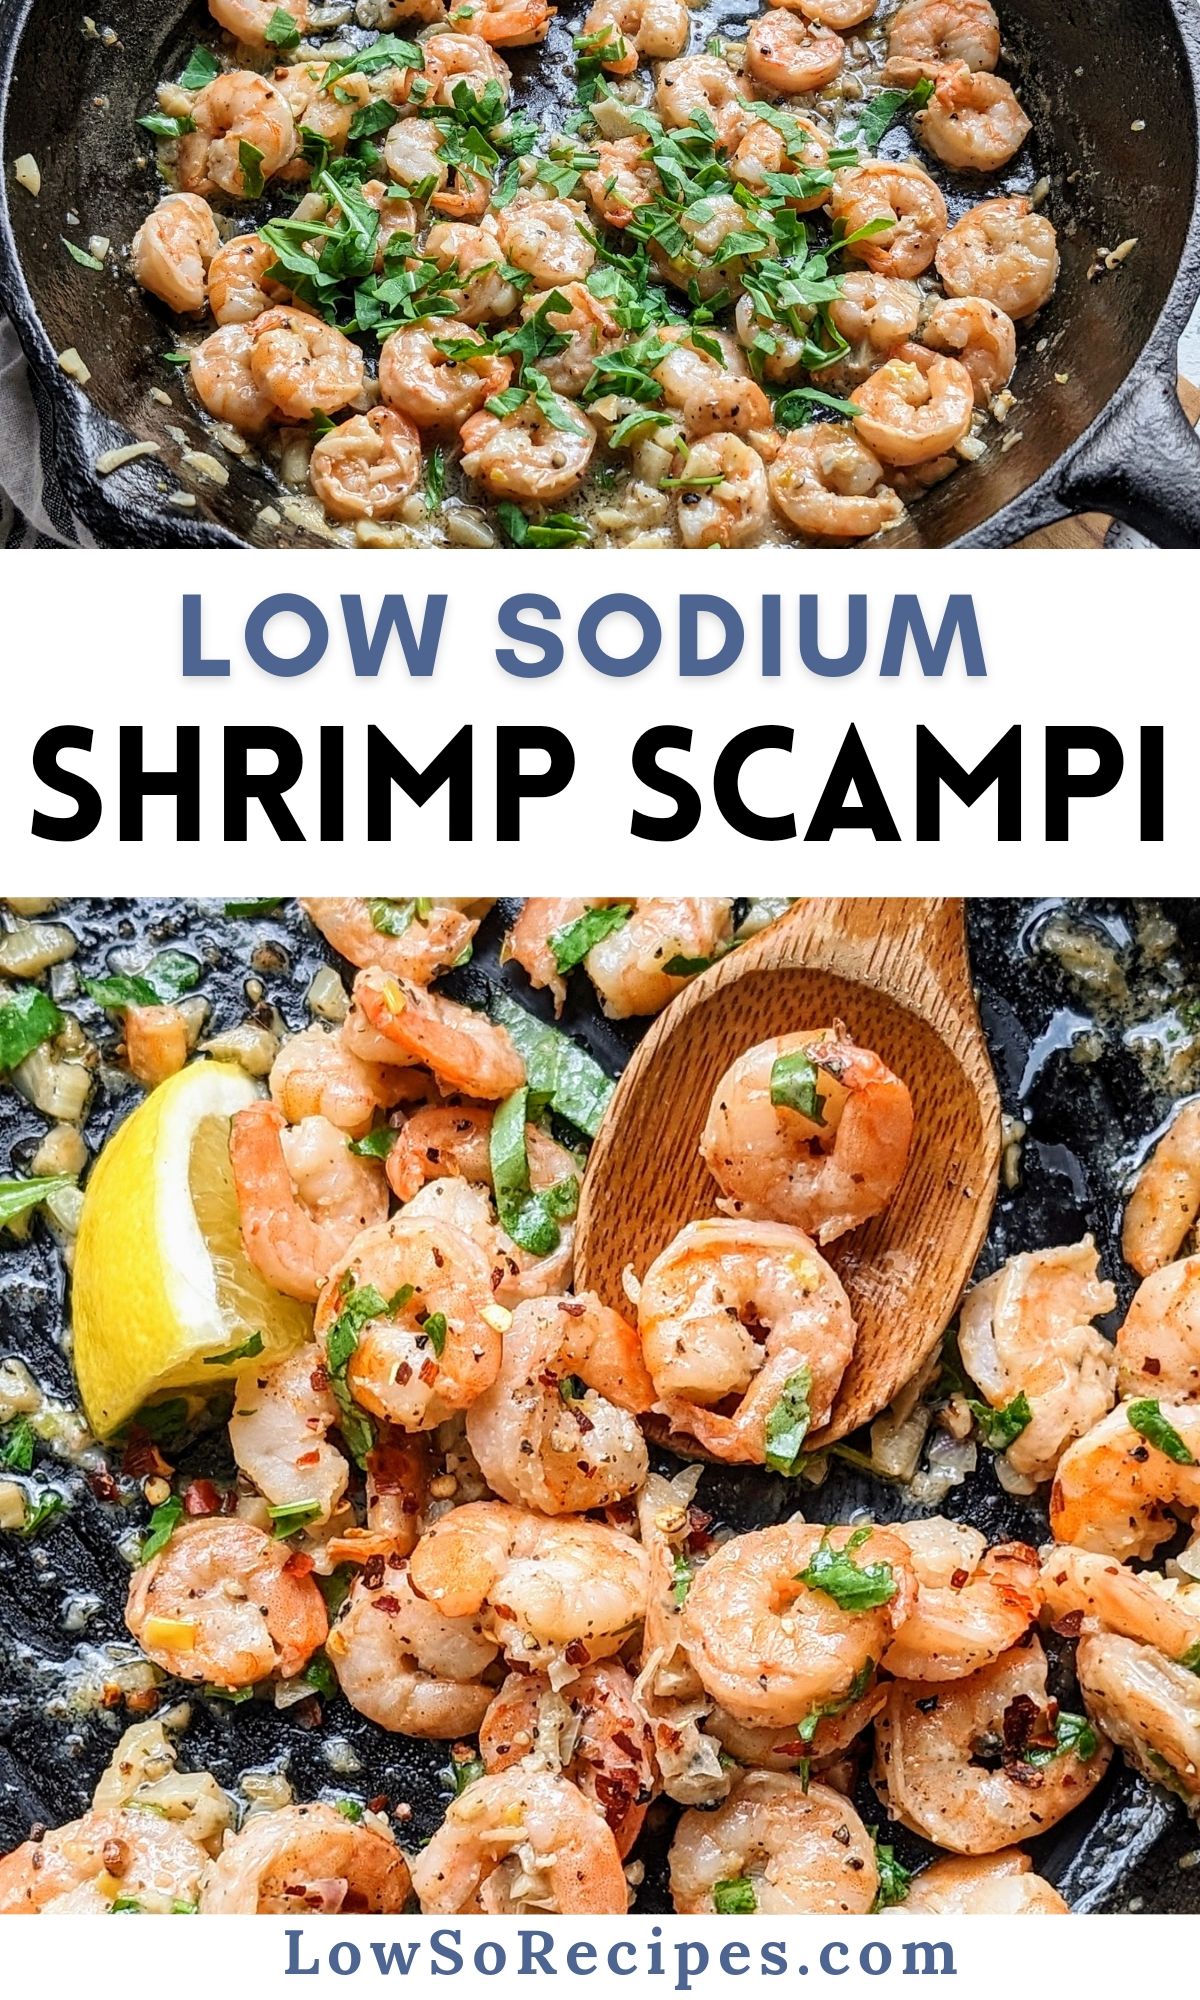 low sodium shrimp scampi recipe in a cast iron skillet with fresh herbs lemon and garlic sauce